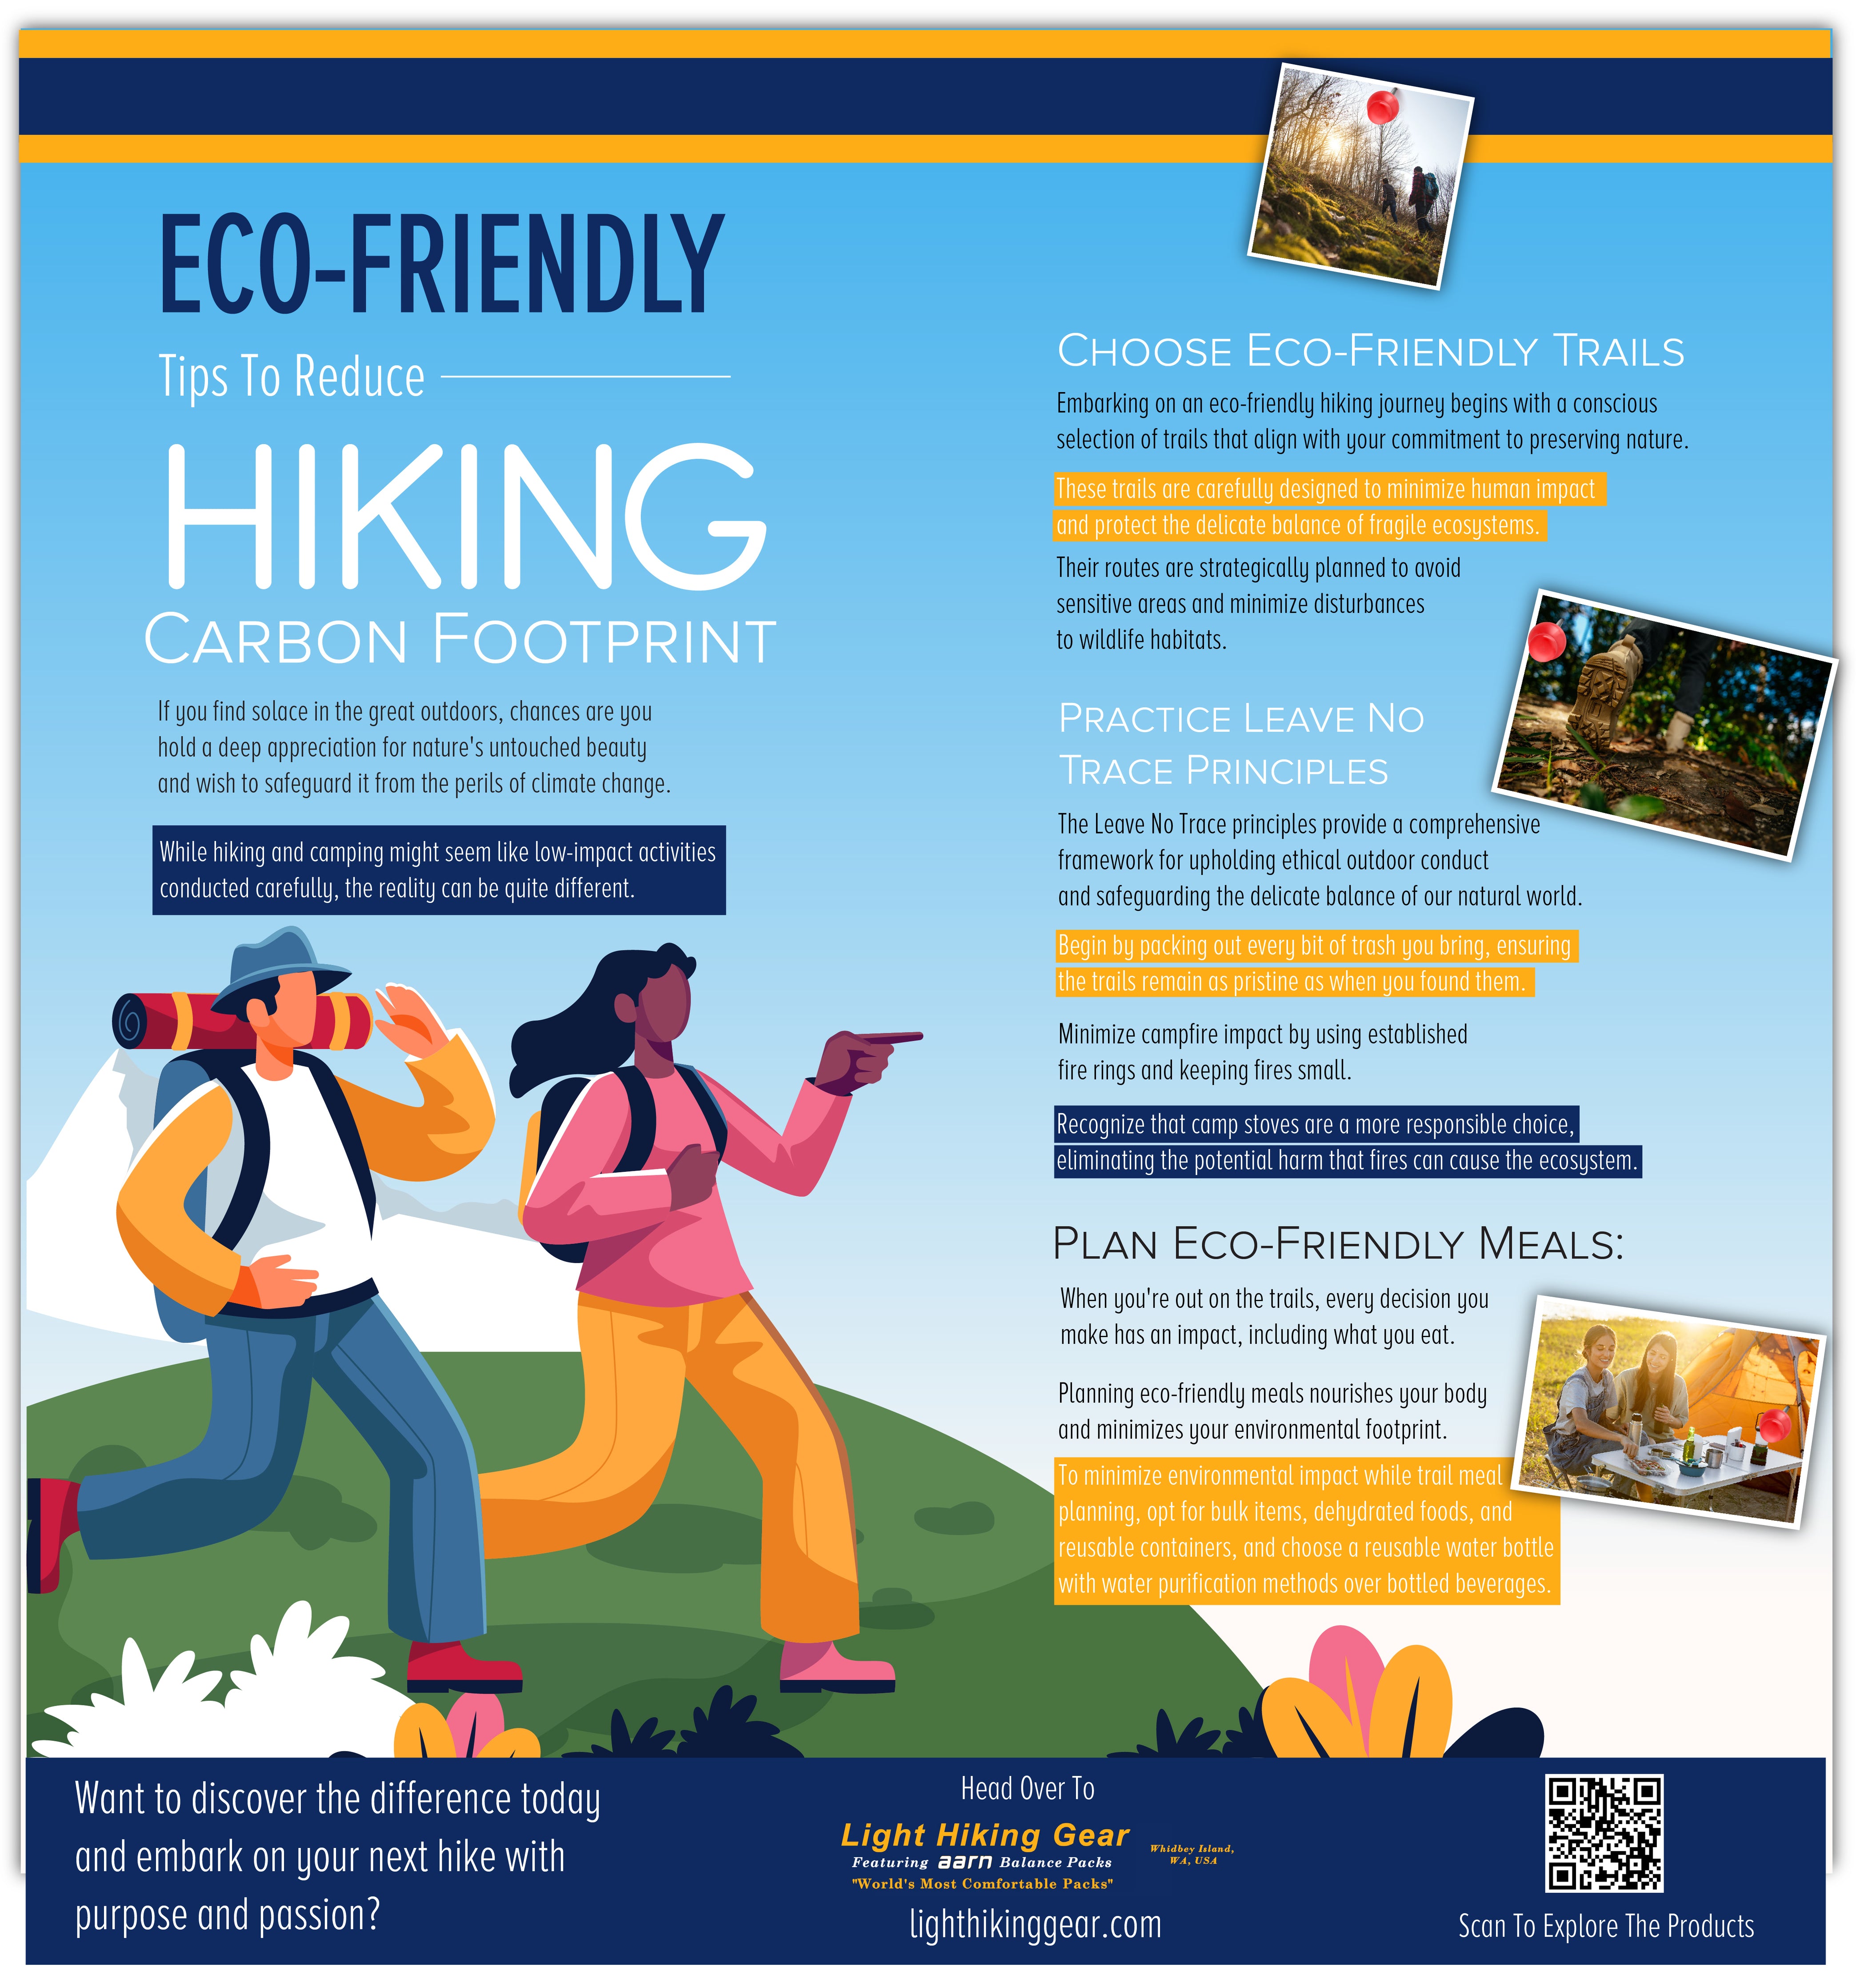 Eco-Friendly Tips To Reduce Hiking Carbon Footprint.